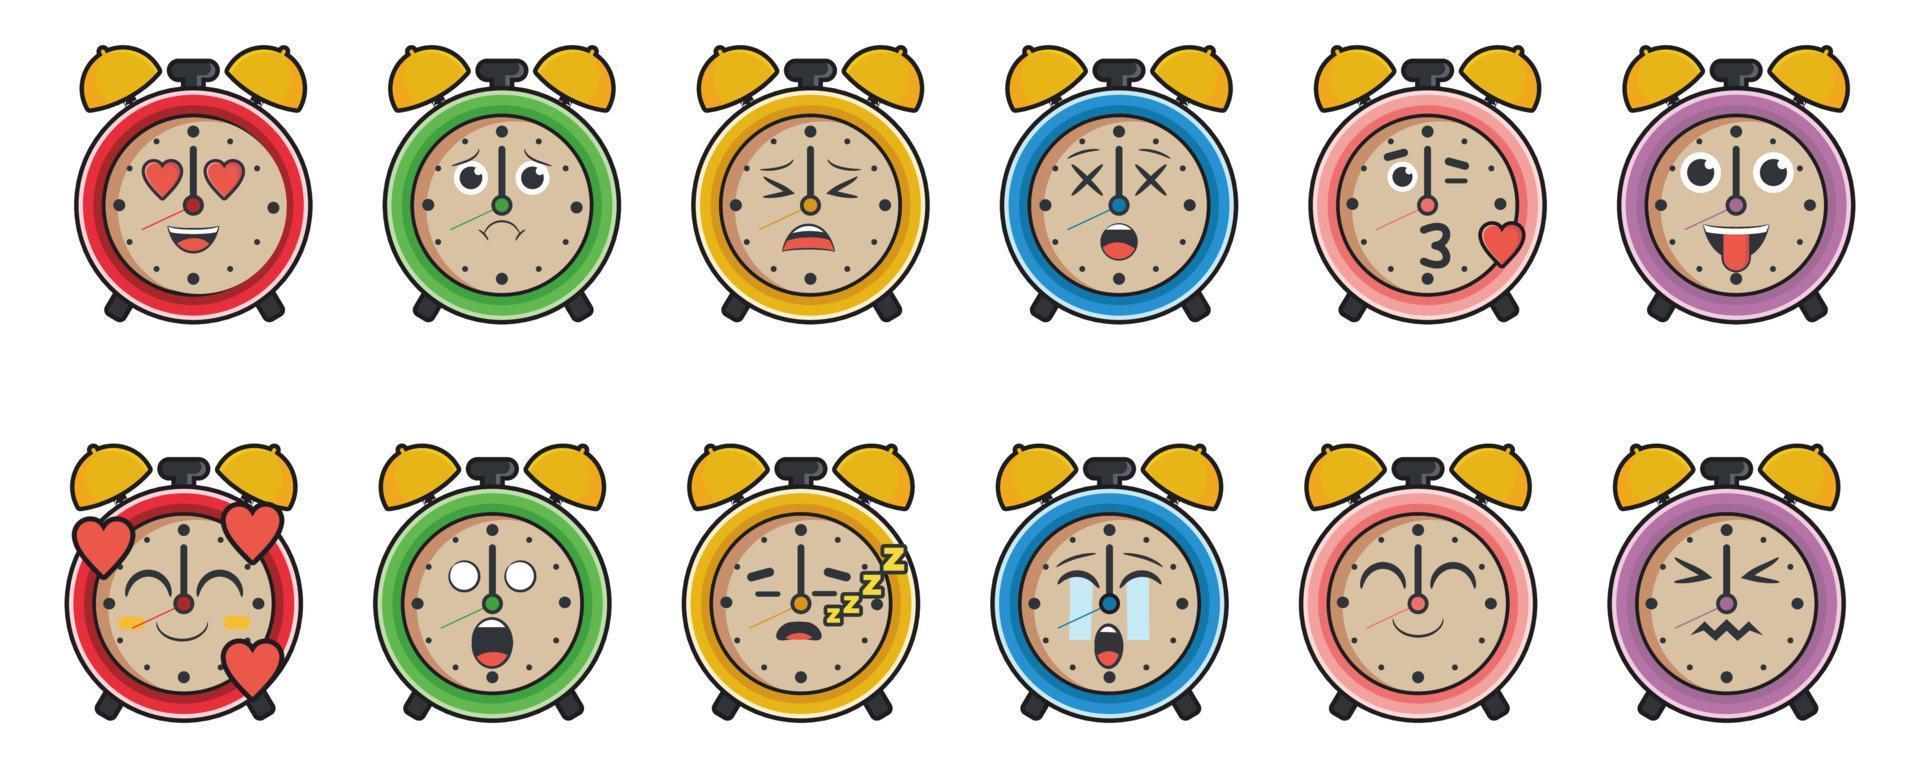 collection of clocks with cute emoticons vector